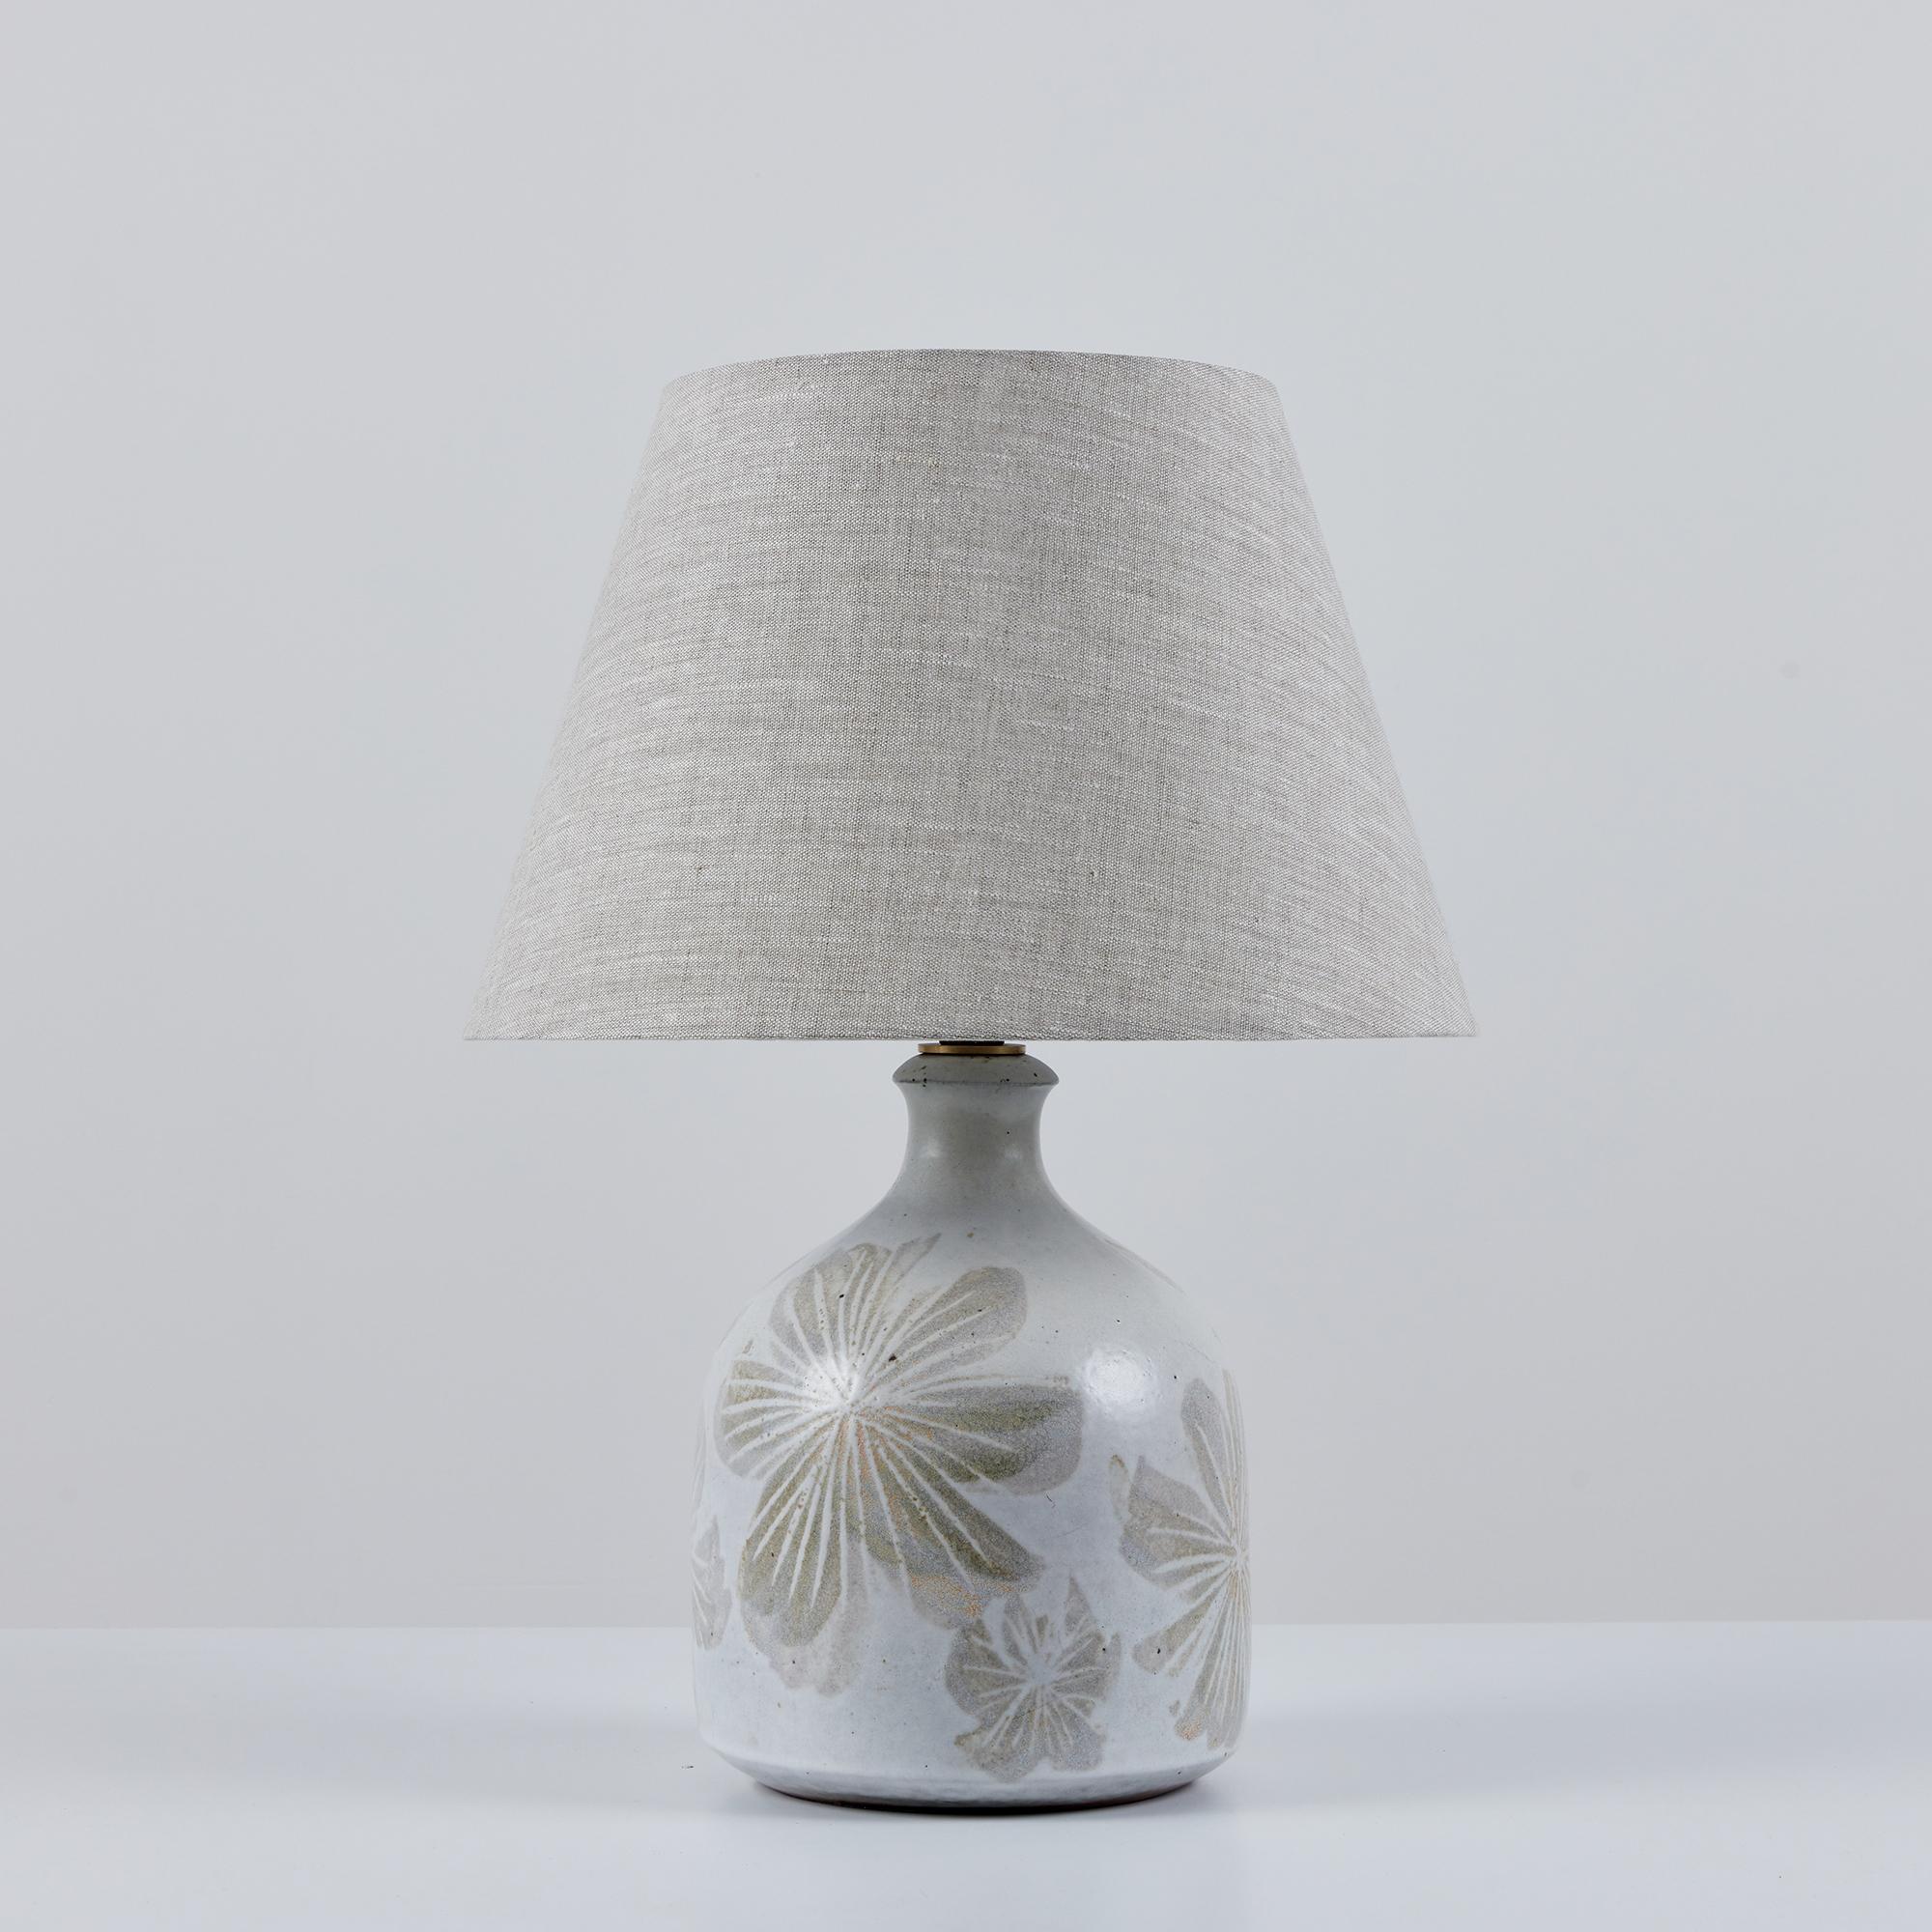 David Cressey ceramic lamp, circa 1960s, USA. The wheel thrown ceramic lamp features a speckled grayish blue colored glaze with applied floral detailing in a gray-brown tone. The newly rewired lamp features new light gray linen shade. The shade and